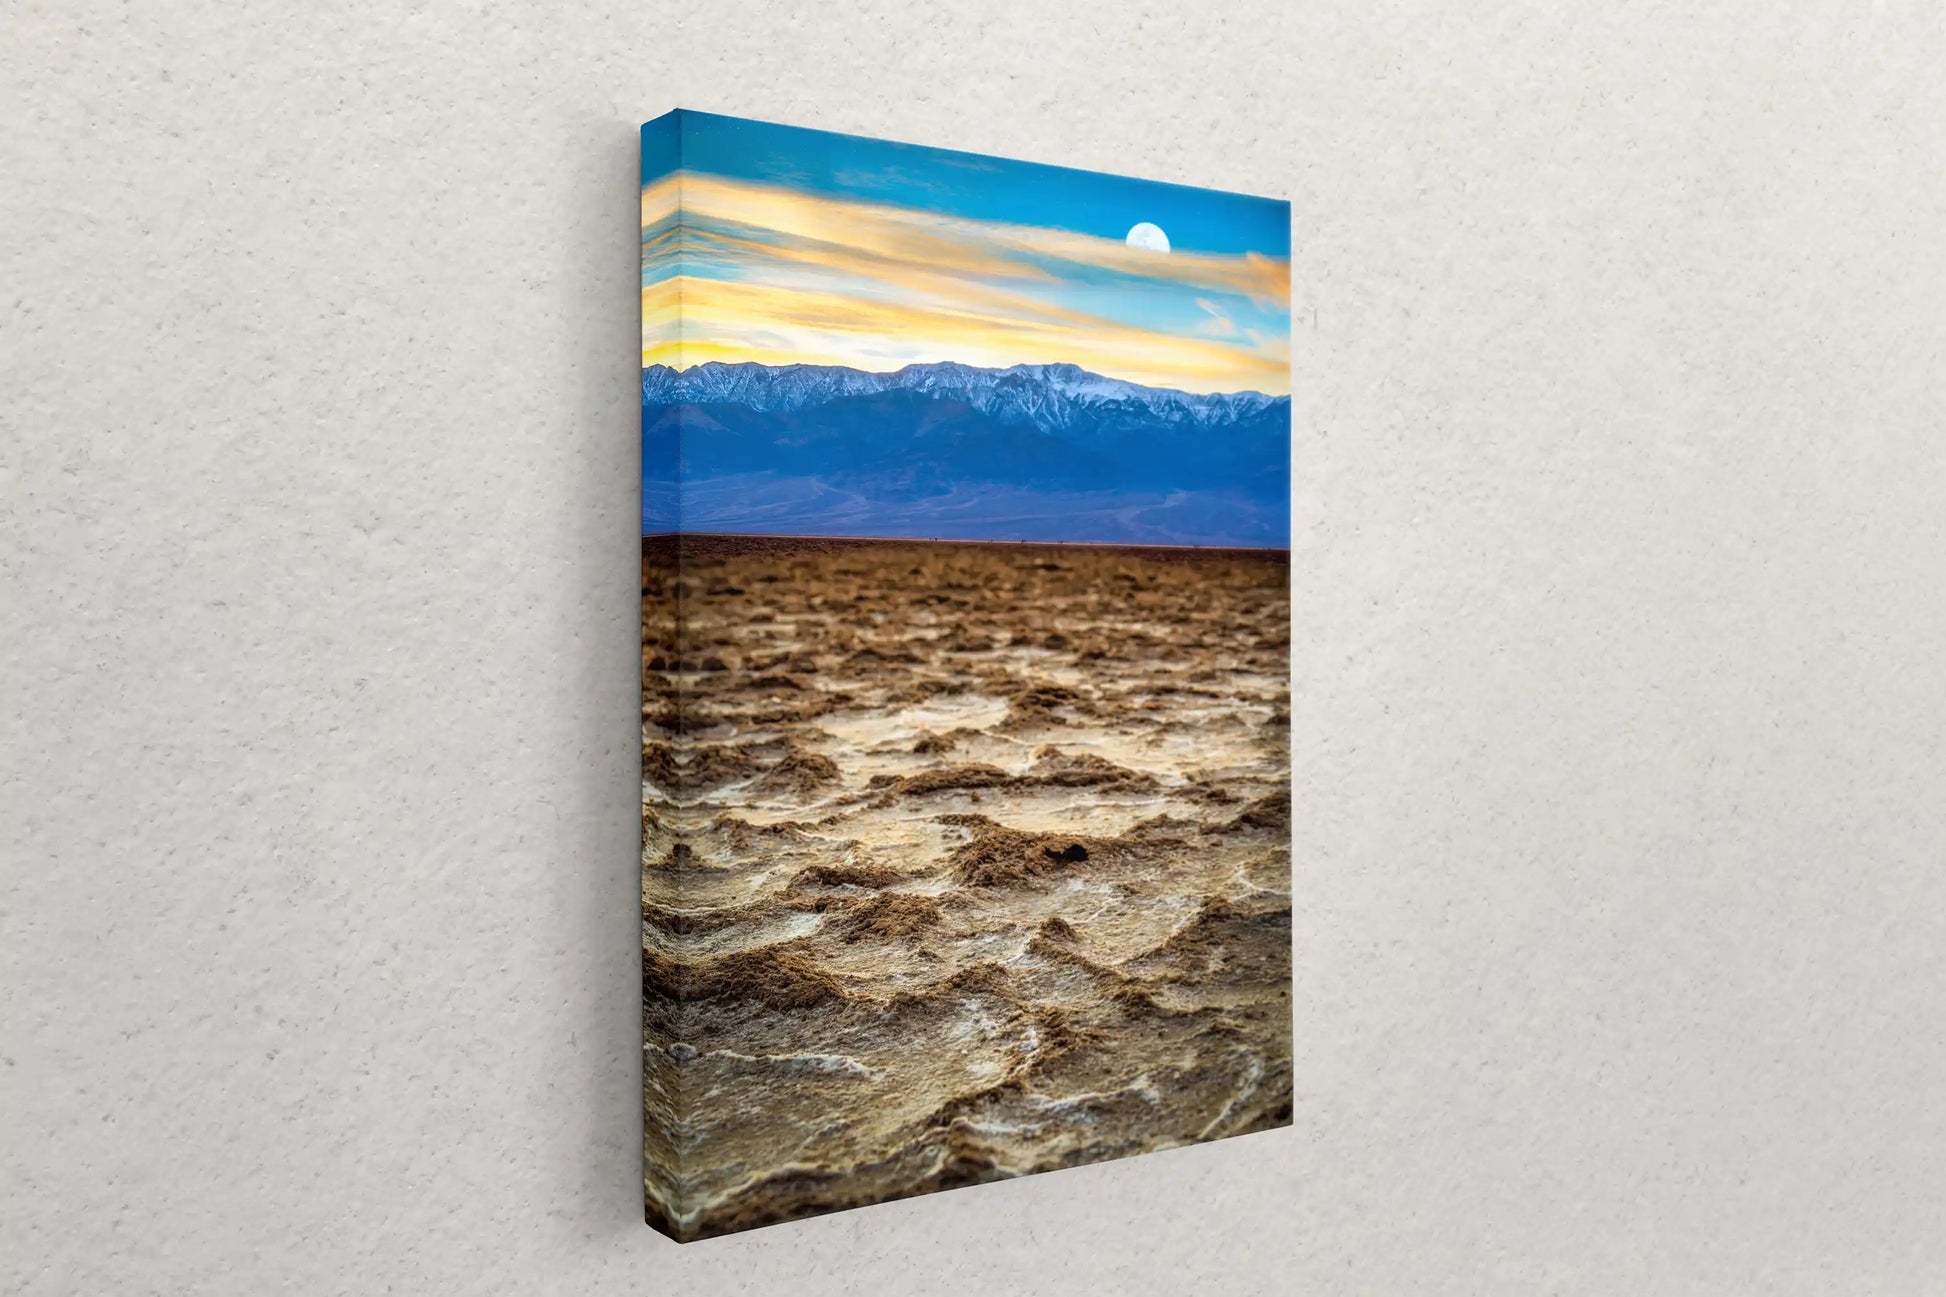 Left-hanging canvas on a wall showing the detailed texture of Badwater Basin's salt flats and the colorful sky of Death Valley.